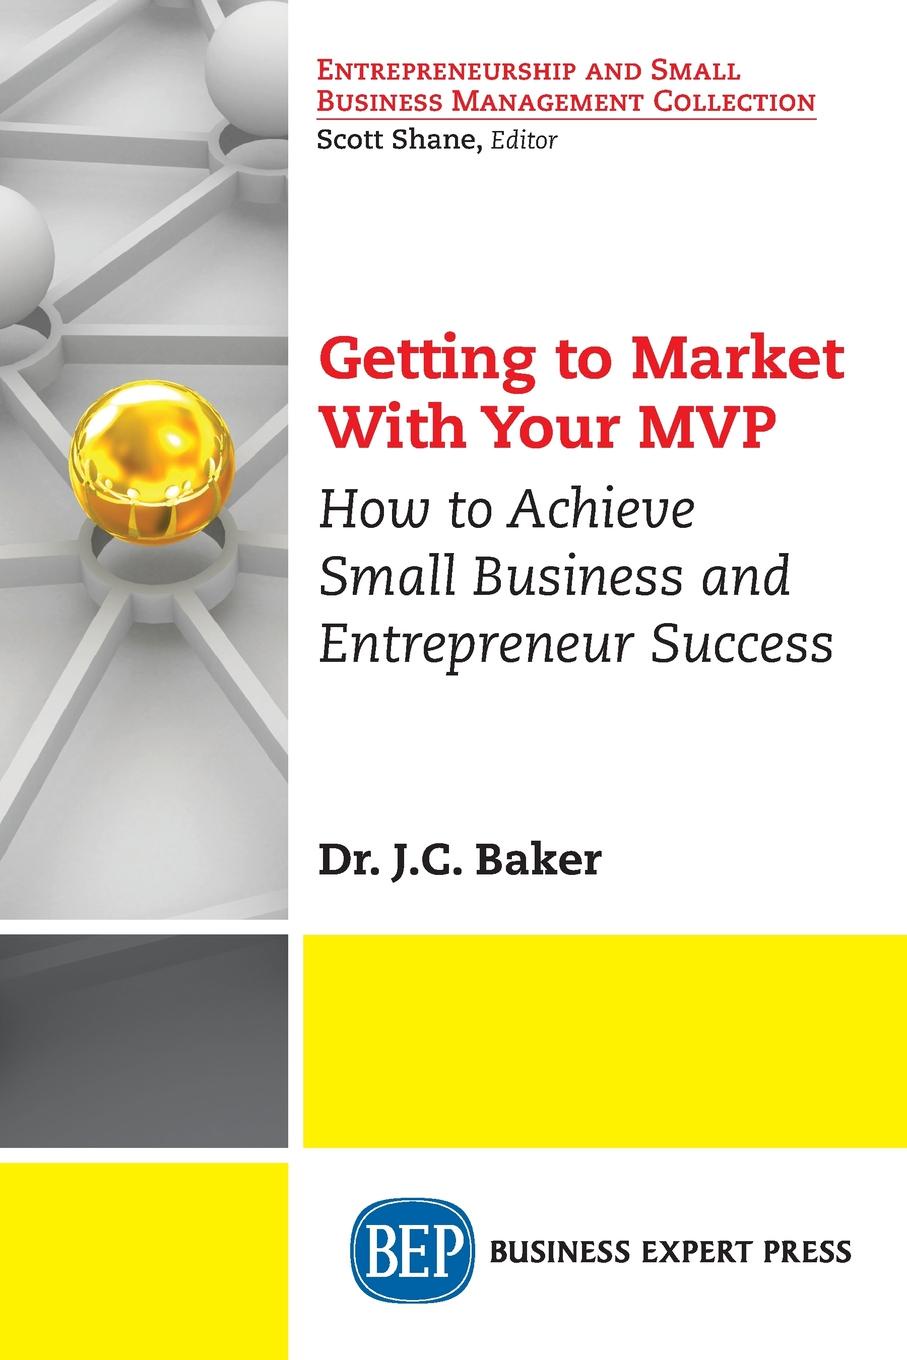 Getting to Market With Your MVP. How to Achieve Small Business and Entrepreneur Success